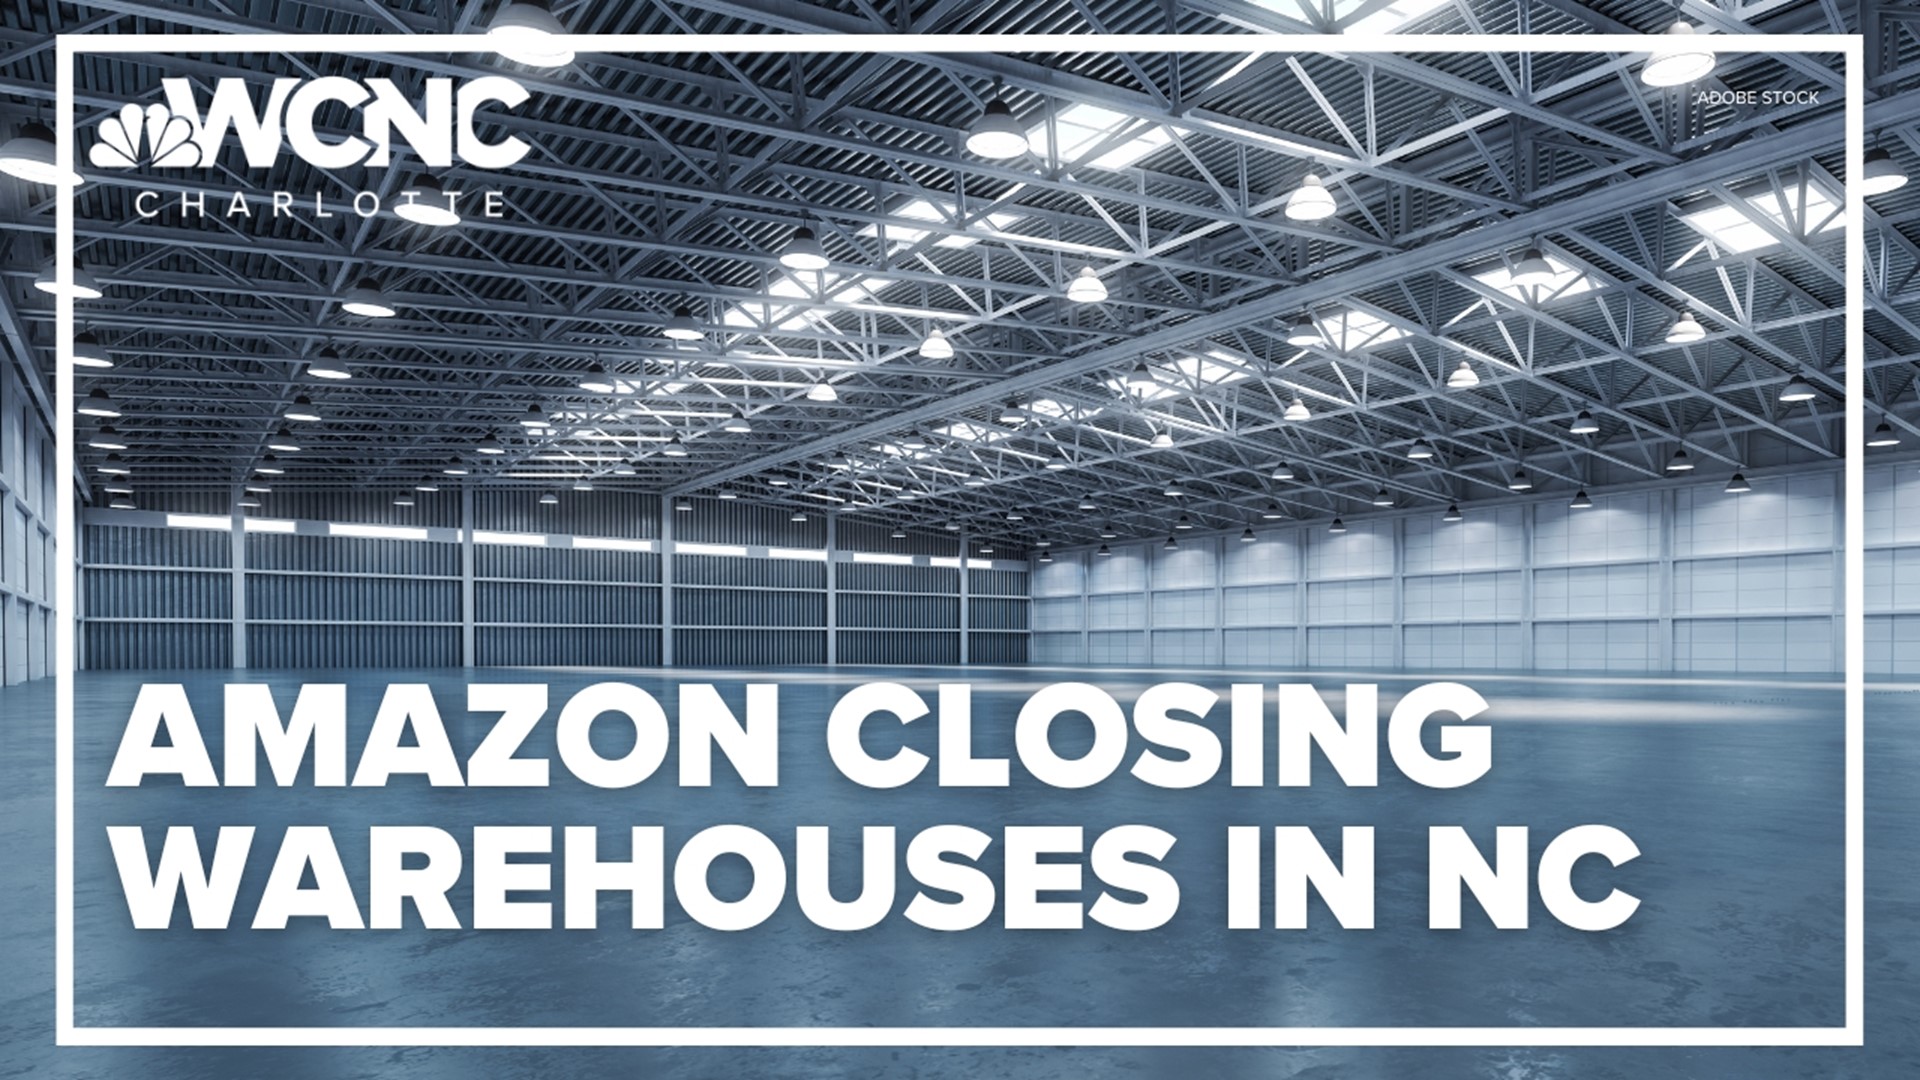 Amazon is closing or delaying at least four warehouses and delivery stations in North Carolina.